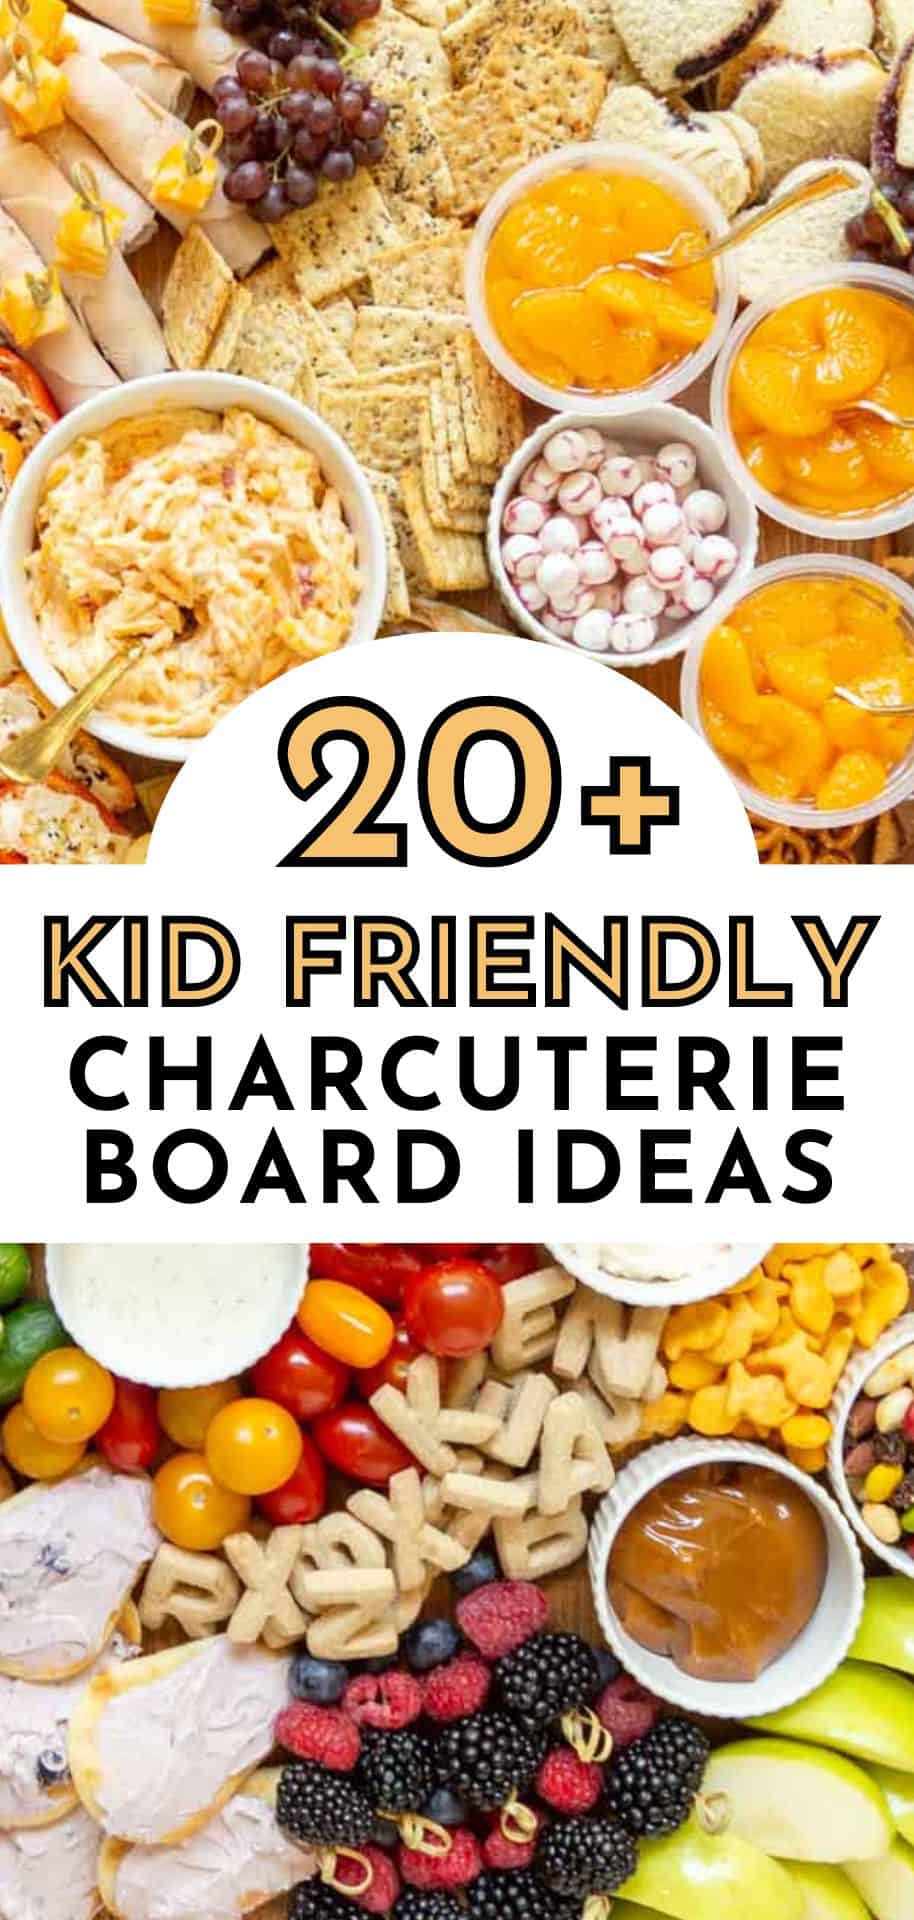 Charcuterie Boards for Kids